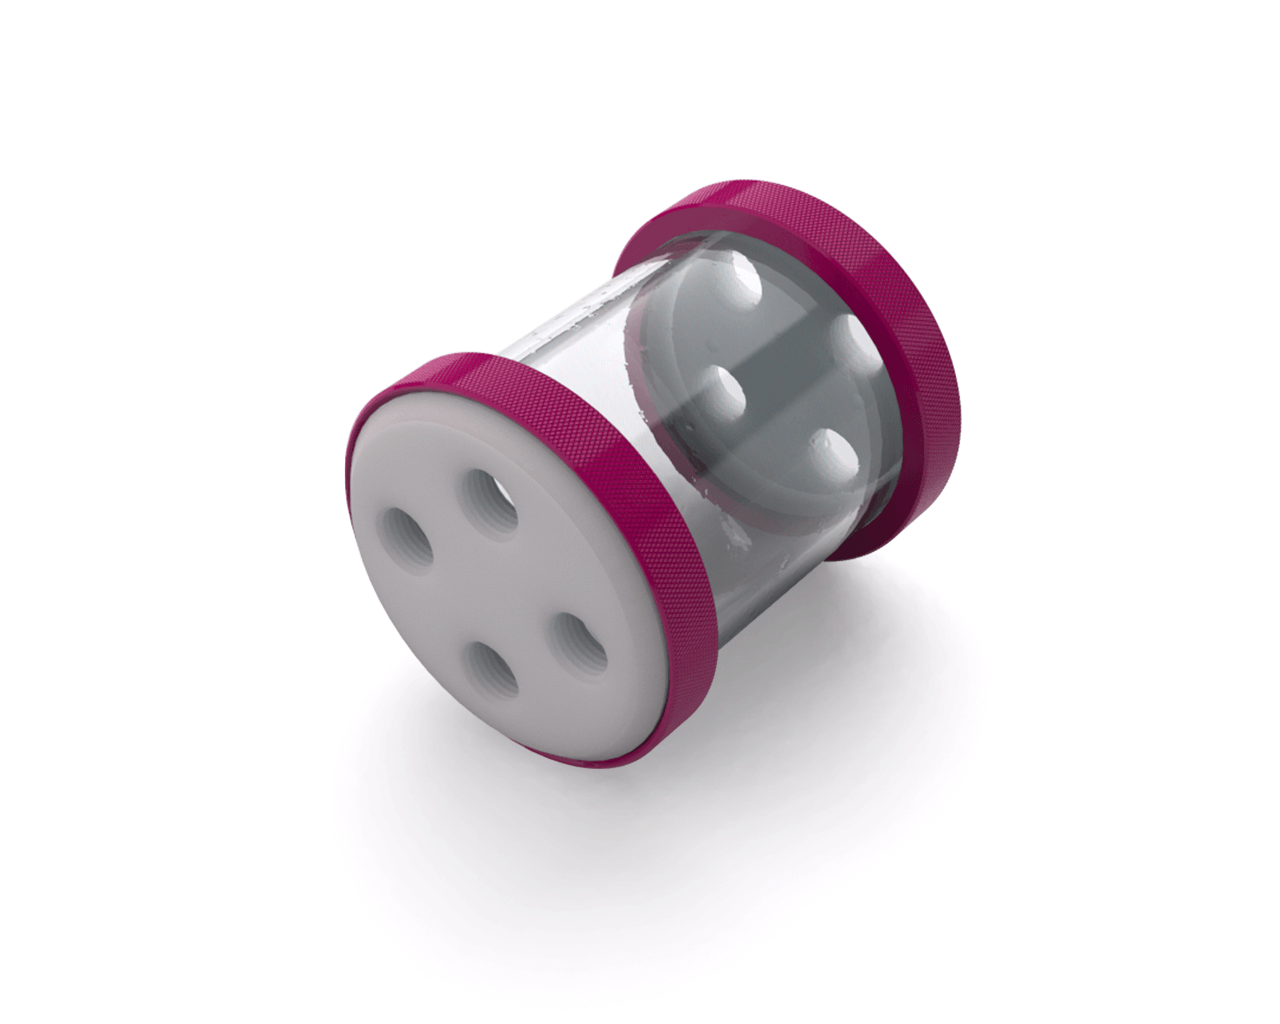 PrimoChill CTR Low Profile Phase II Reservoir - White POM - 80mm - PrimoChill - KEEPING IT COOL Magenta